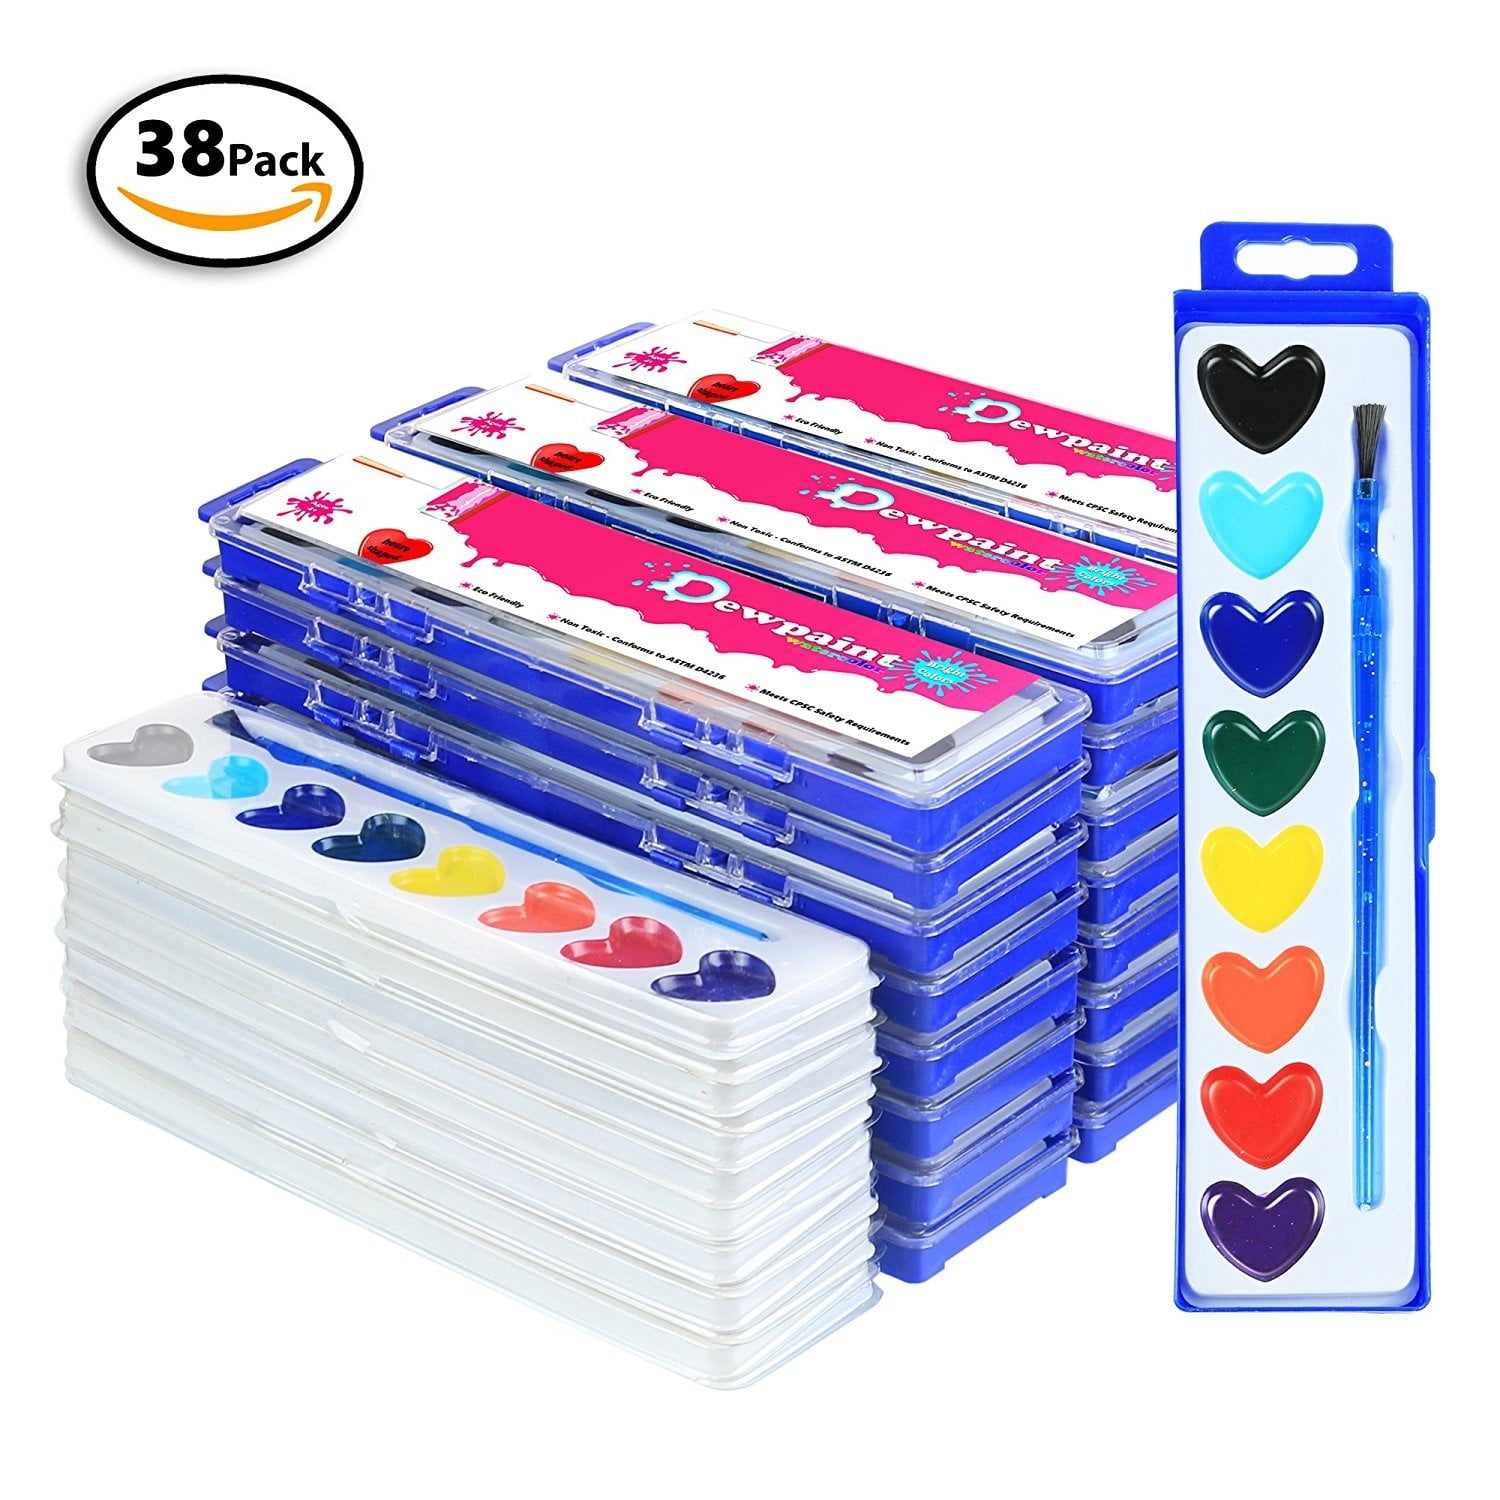 38 Water Color Paints Jumbo Pack - Heart Shaped